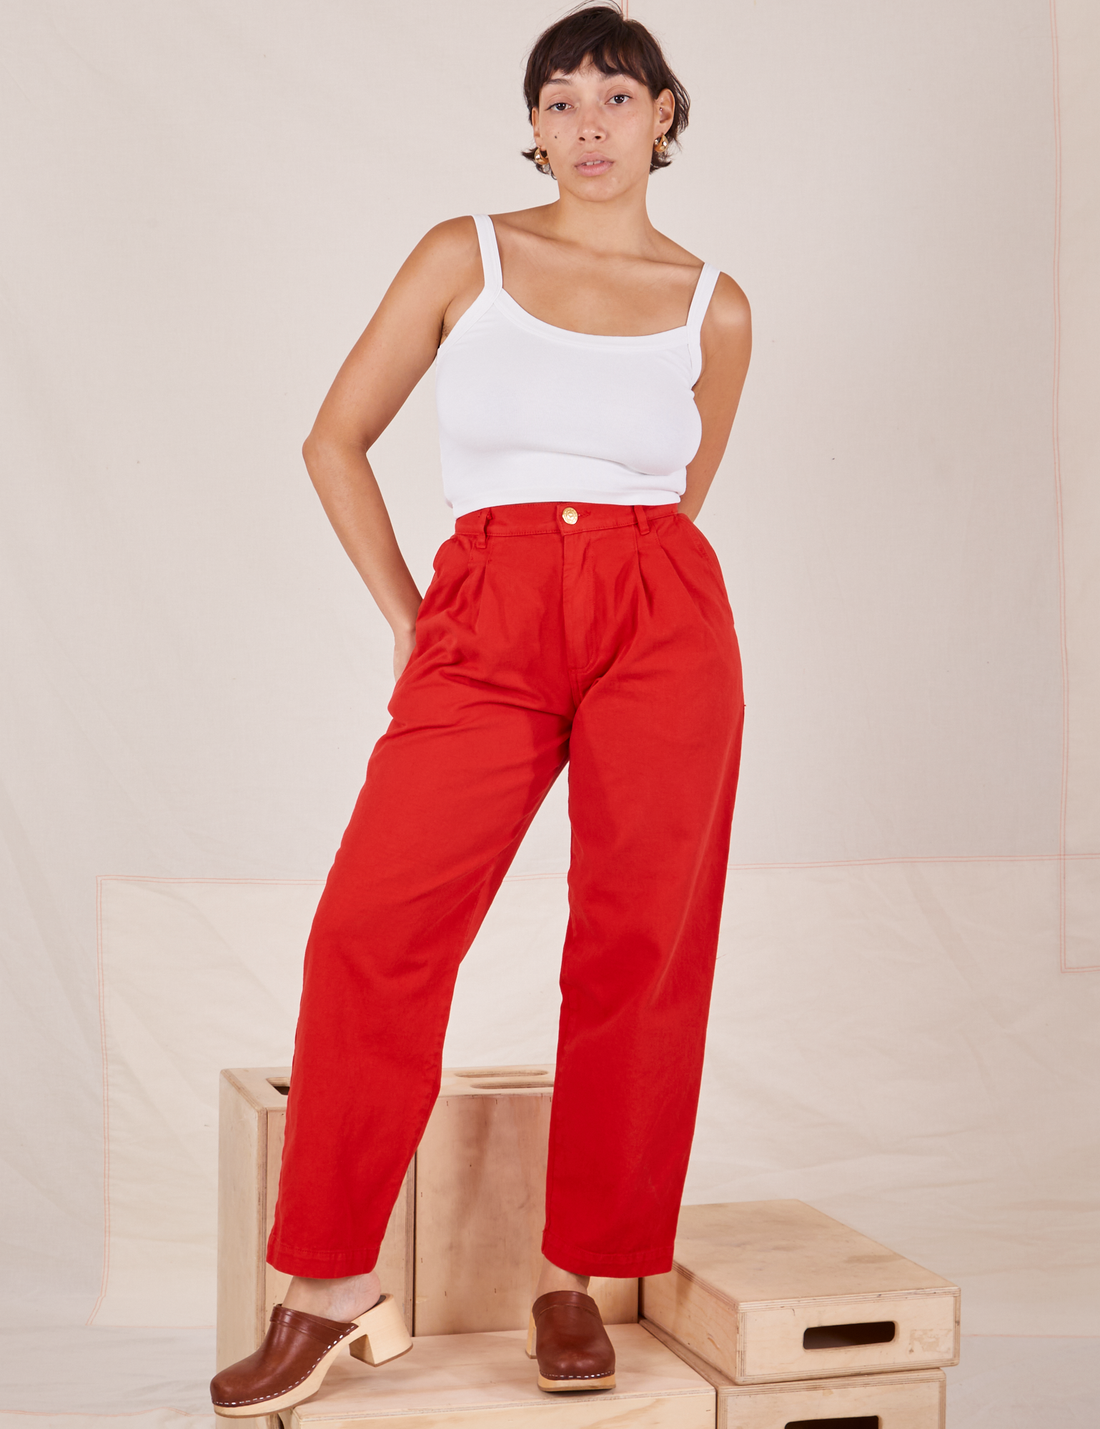 Tiara is 5'4" and wearing S Heavyweight Trousers in Mustang Red paired with vintage off-white Cropped Cami